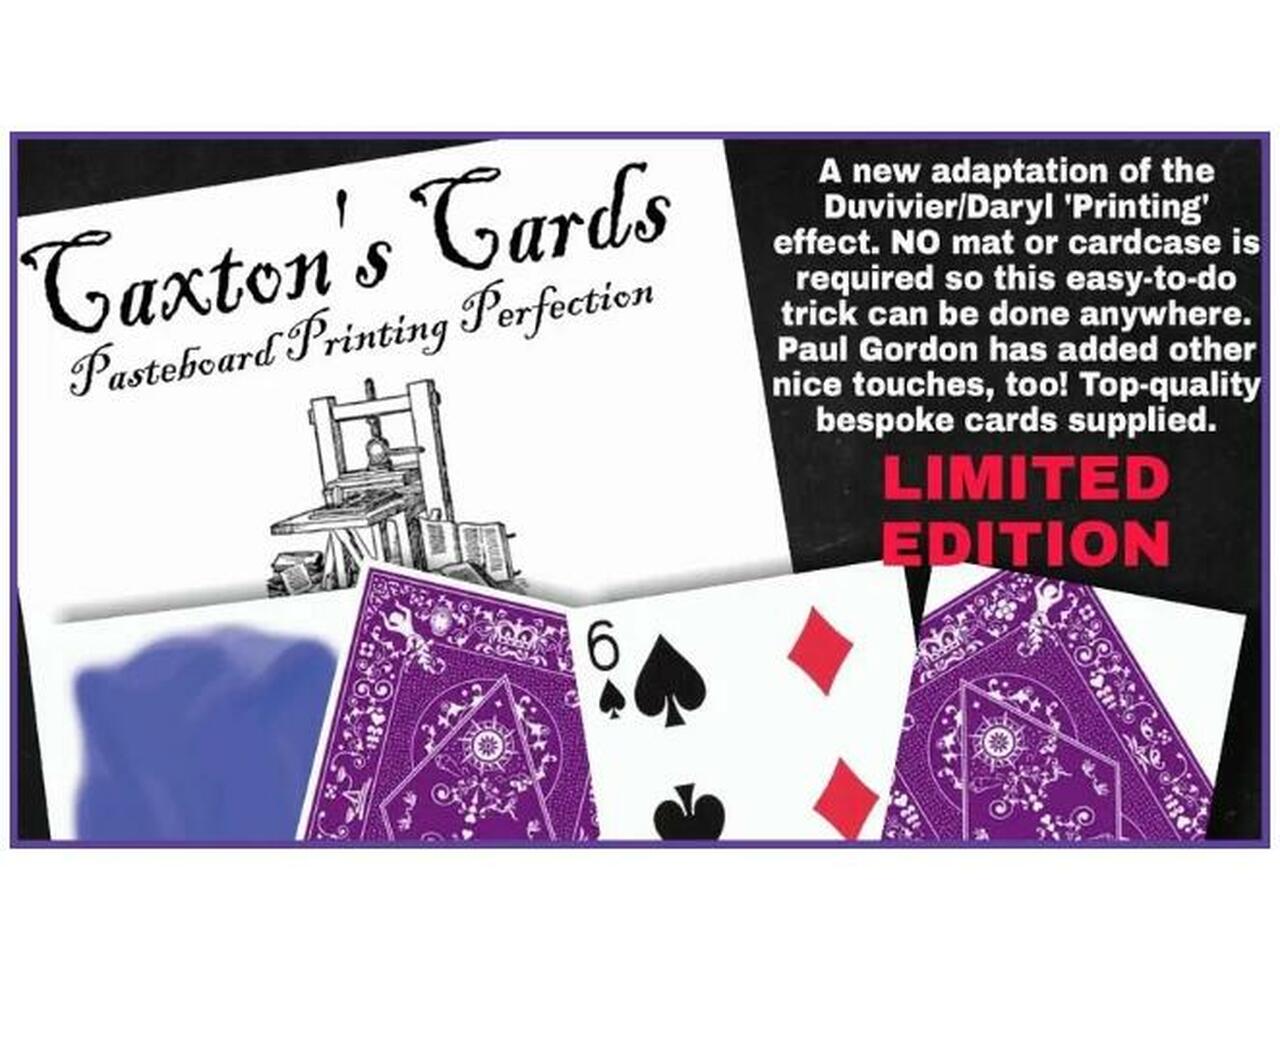 Caxton's Cards by Paul Gordon (MP4 Video Download)